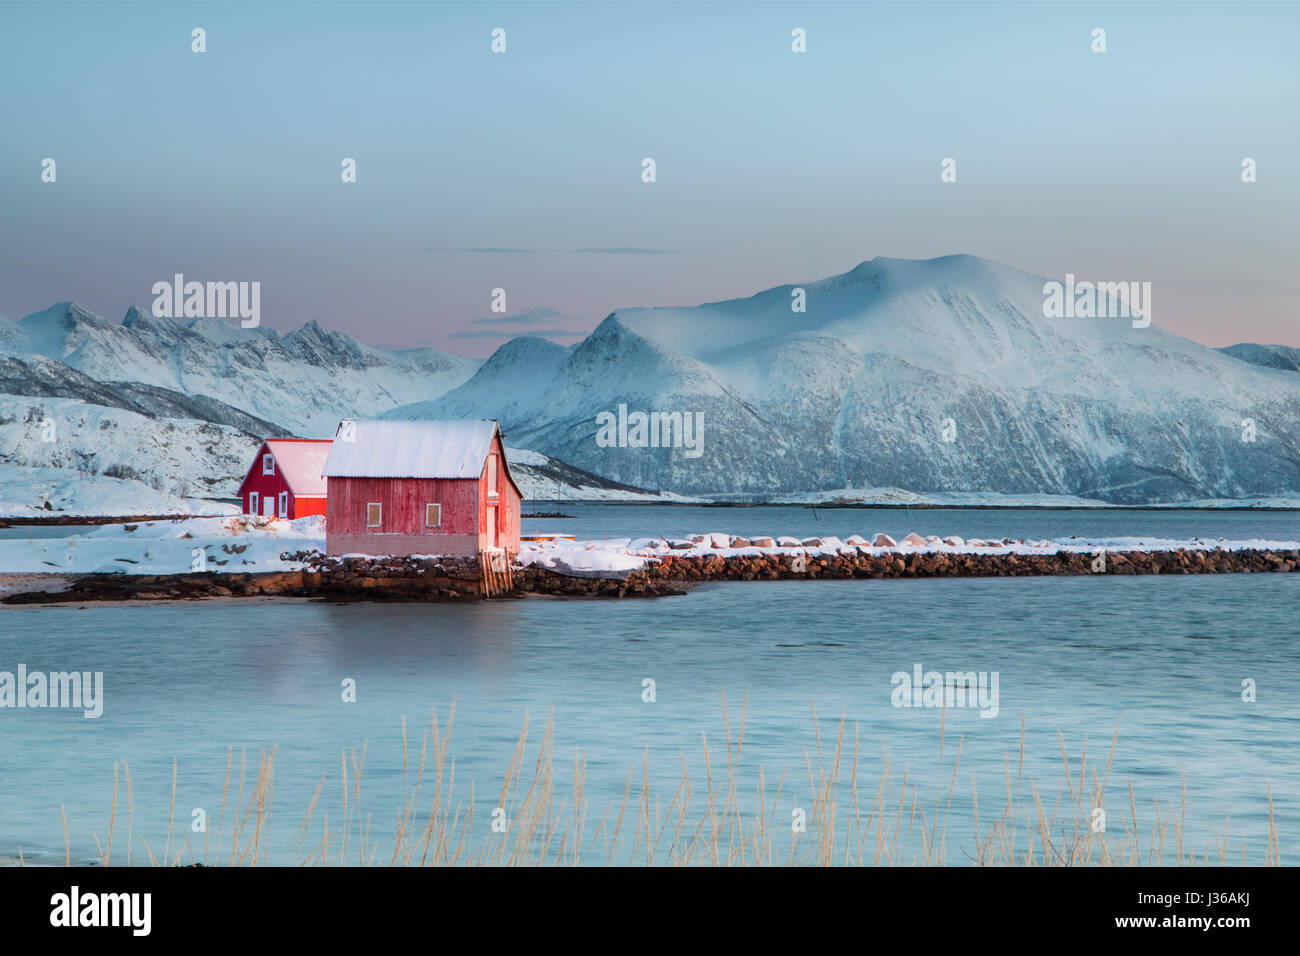 Solitary typical Norwegian red wooden boat house in the snow at sunset Stock Photo